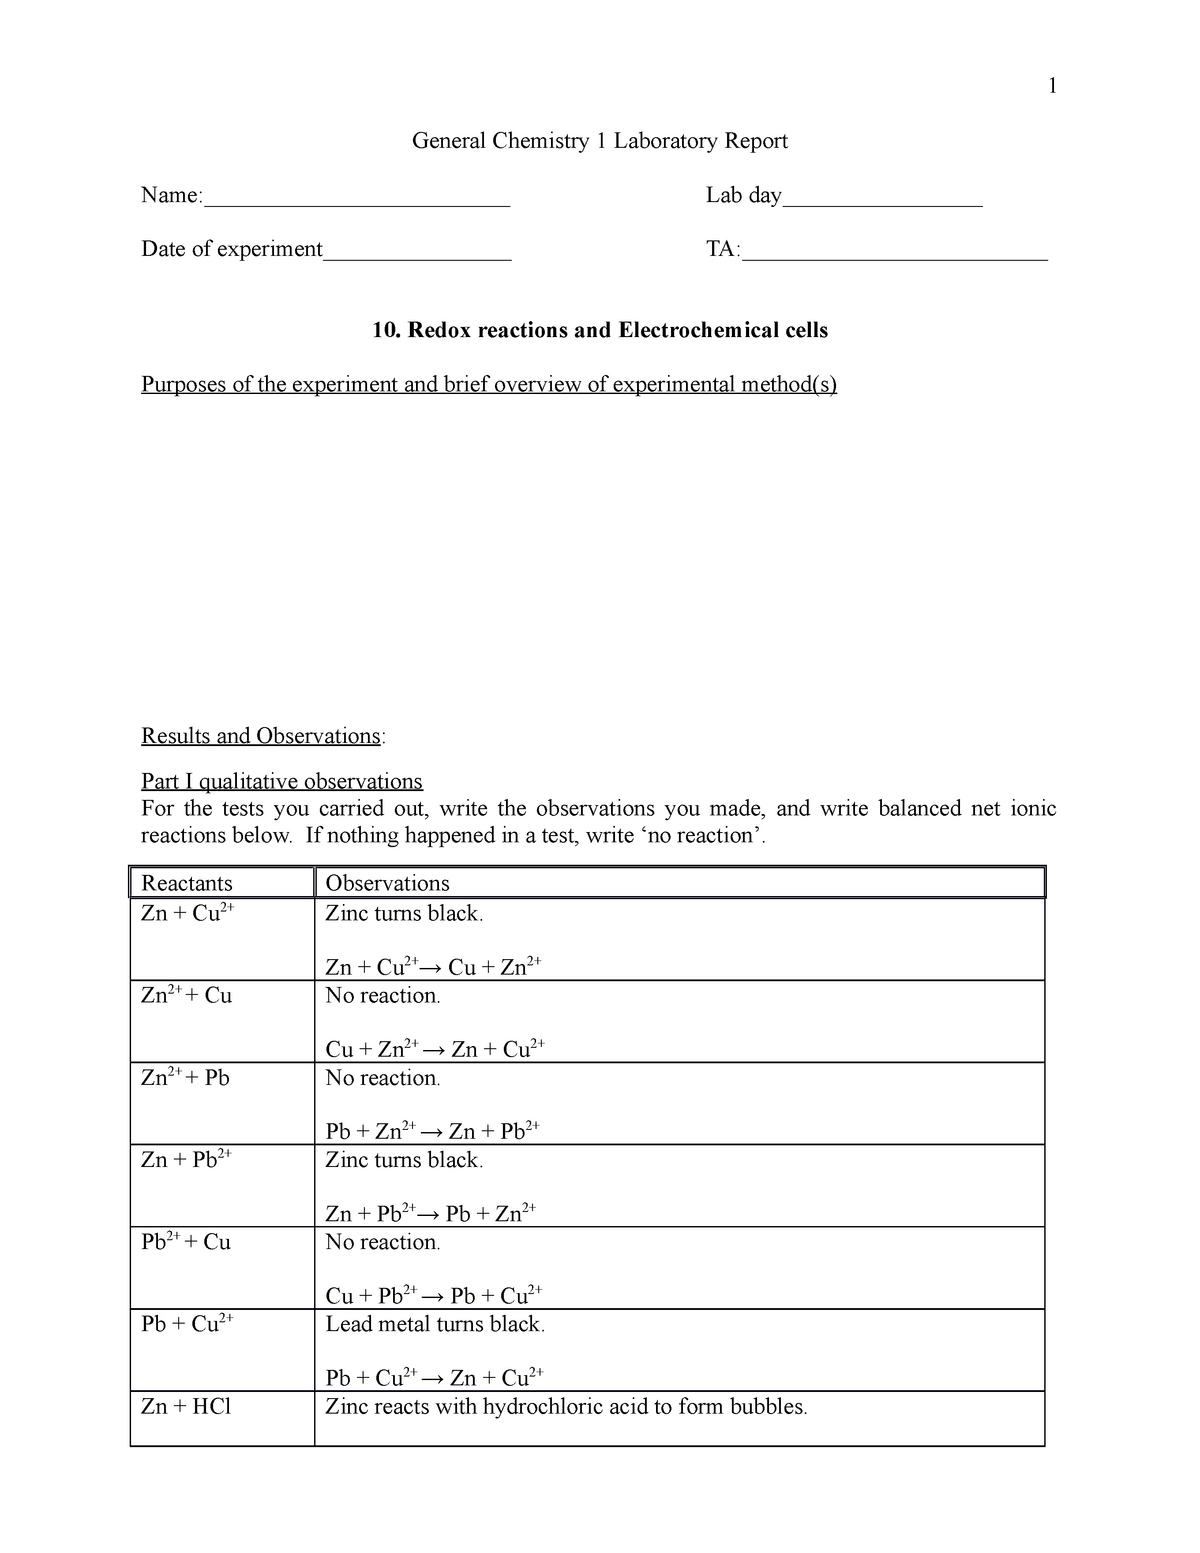 Lab Report Ex 10 Redox Reactions Electrochemical cells General